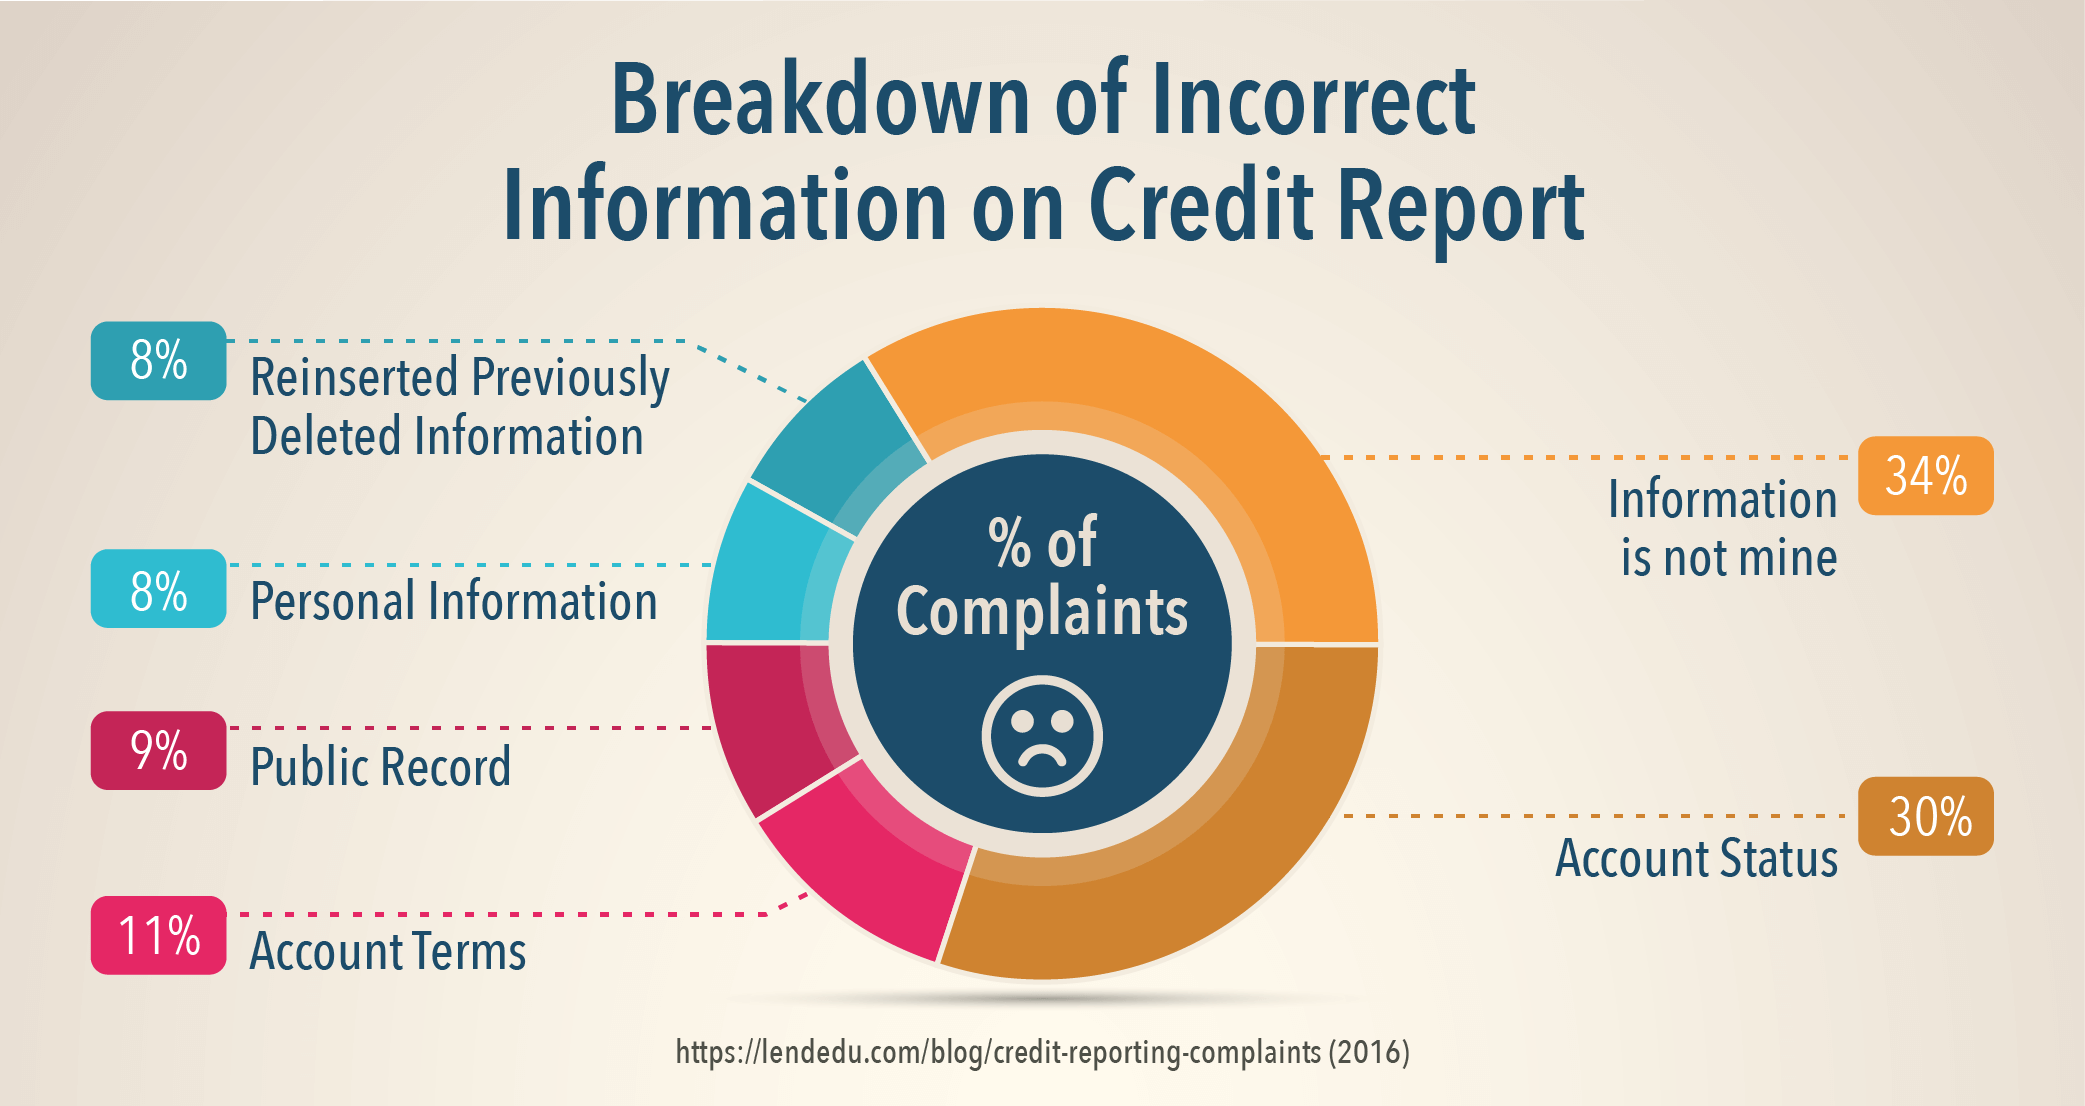 Breakdown of Incorrect Information on Credit Report